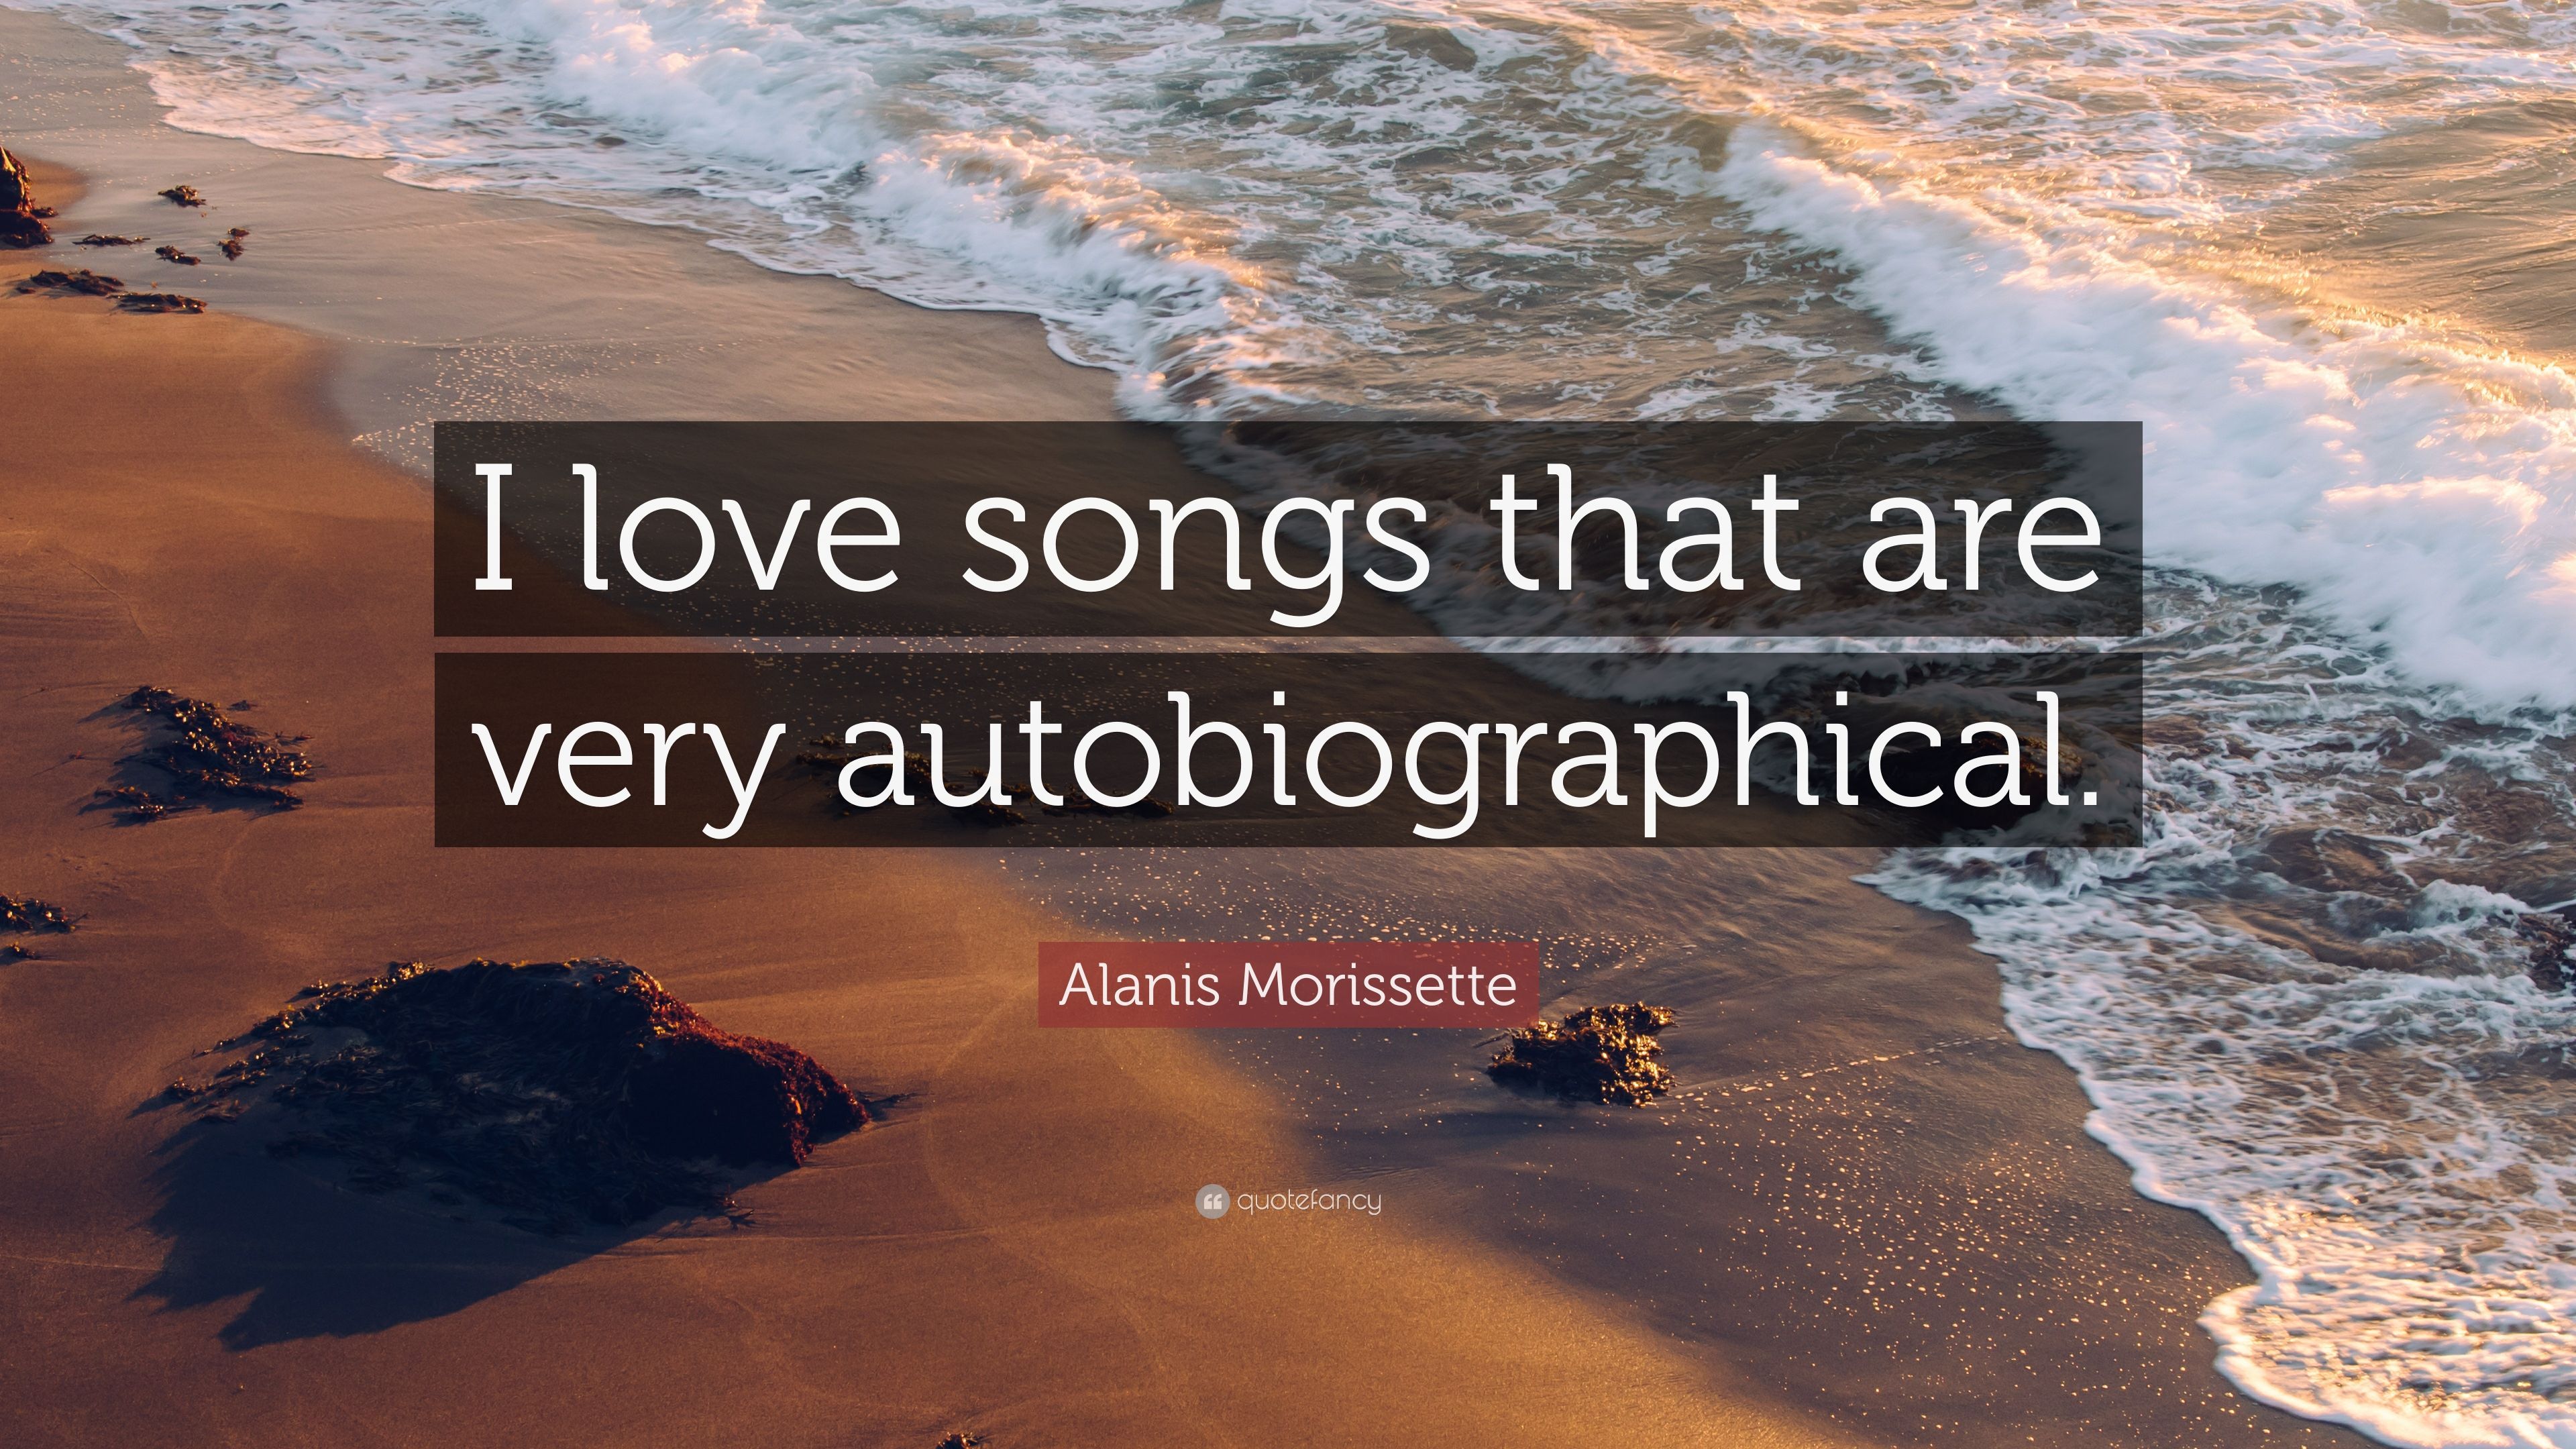 Alanis Morissette Quote: “I love songs that are very